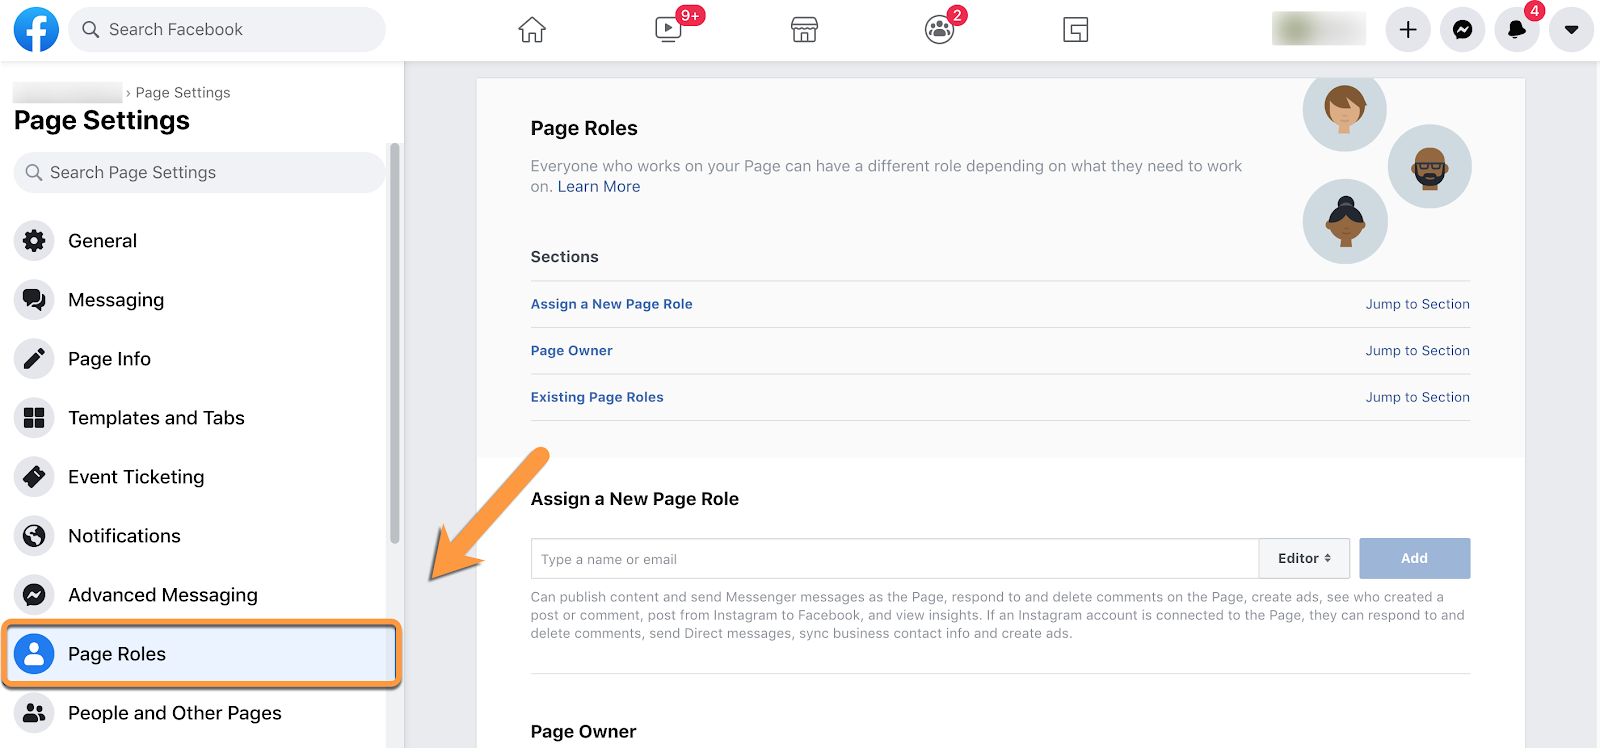 how to transfer Facebook Page ownership